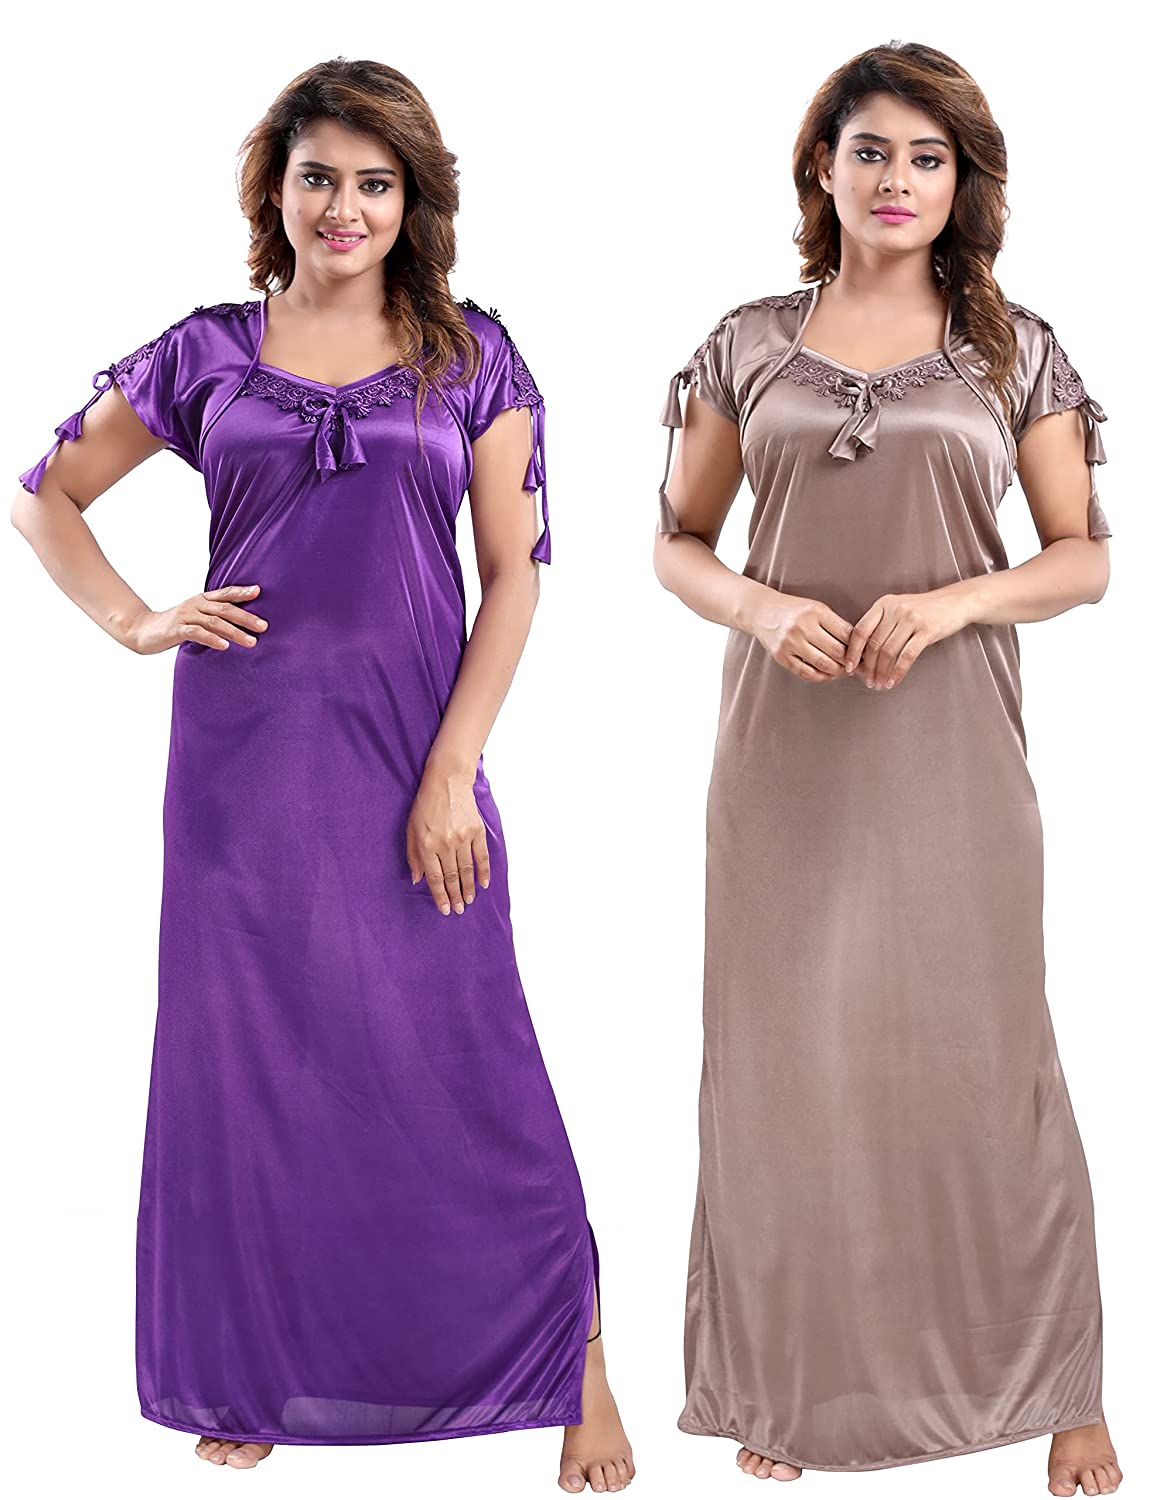 LIFE - TALE Women's Satin Solid Maxi Nighty (Pack of 2) -  Women's Night Wear in Sri Lanka from Arcade Online Shopping - Just Rs. 4999!